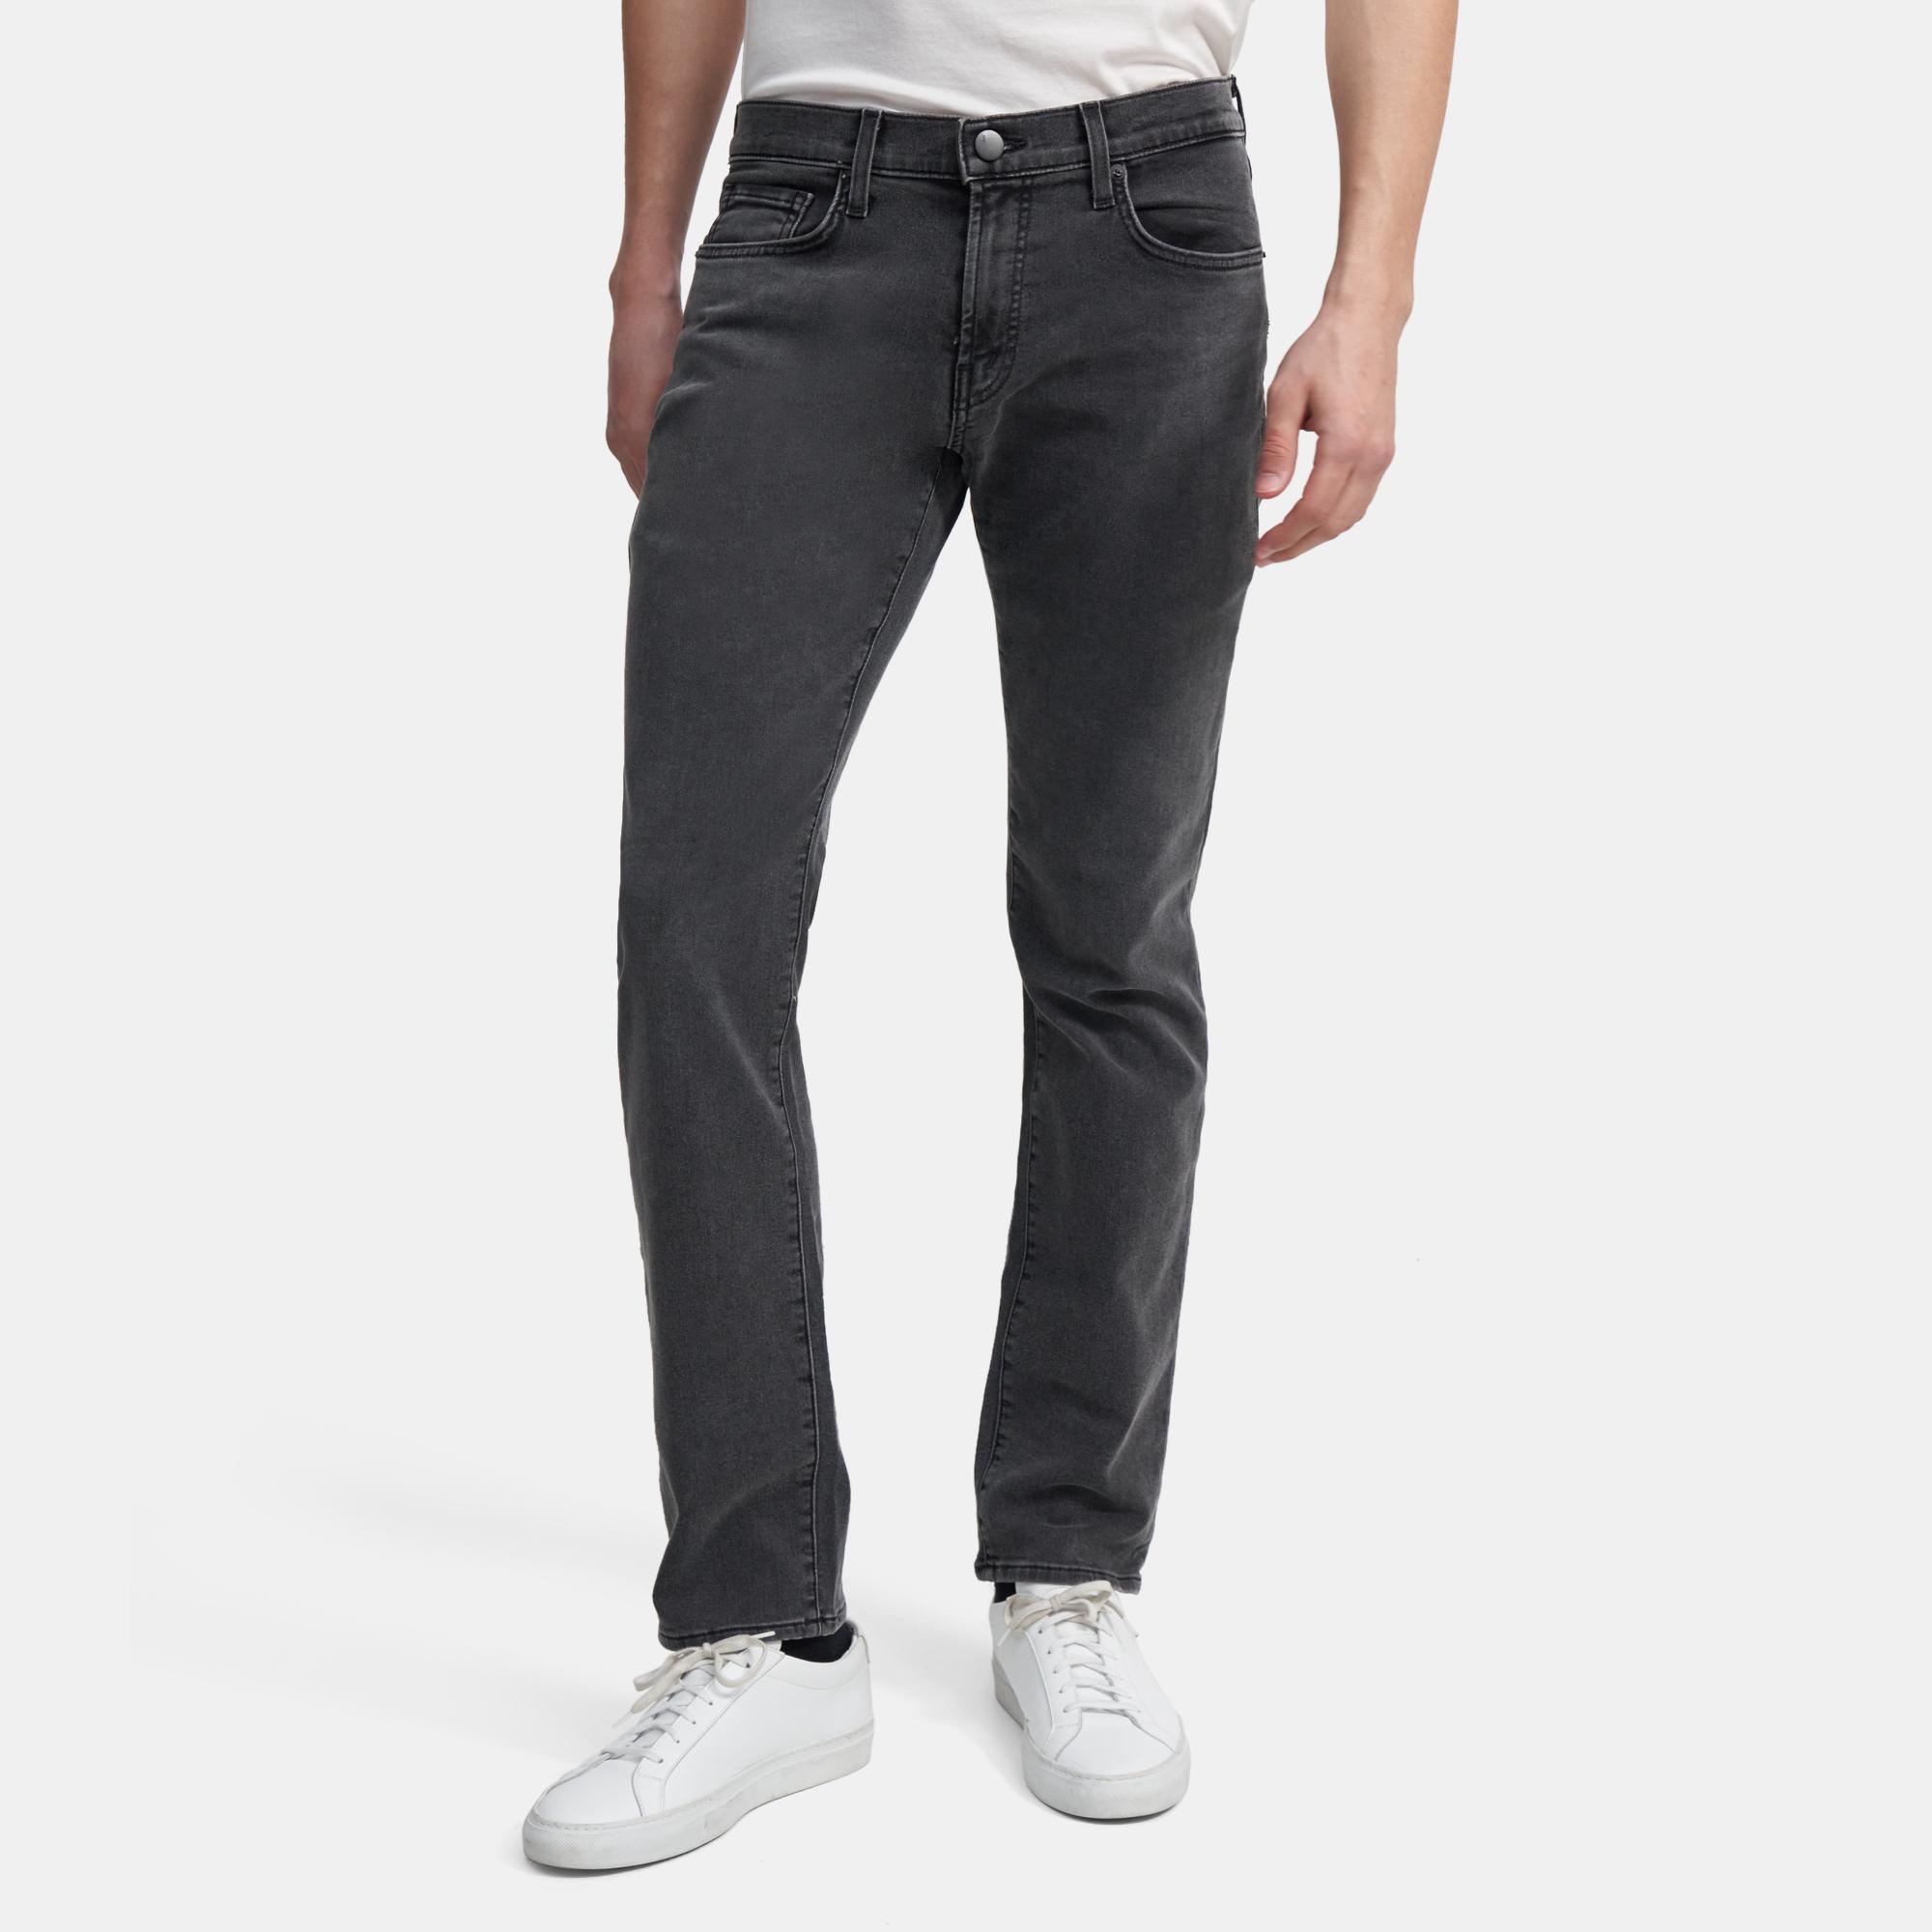 Theory Outlet Official | J Brand Kane Fit Jean in Stretch Denim